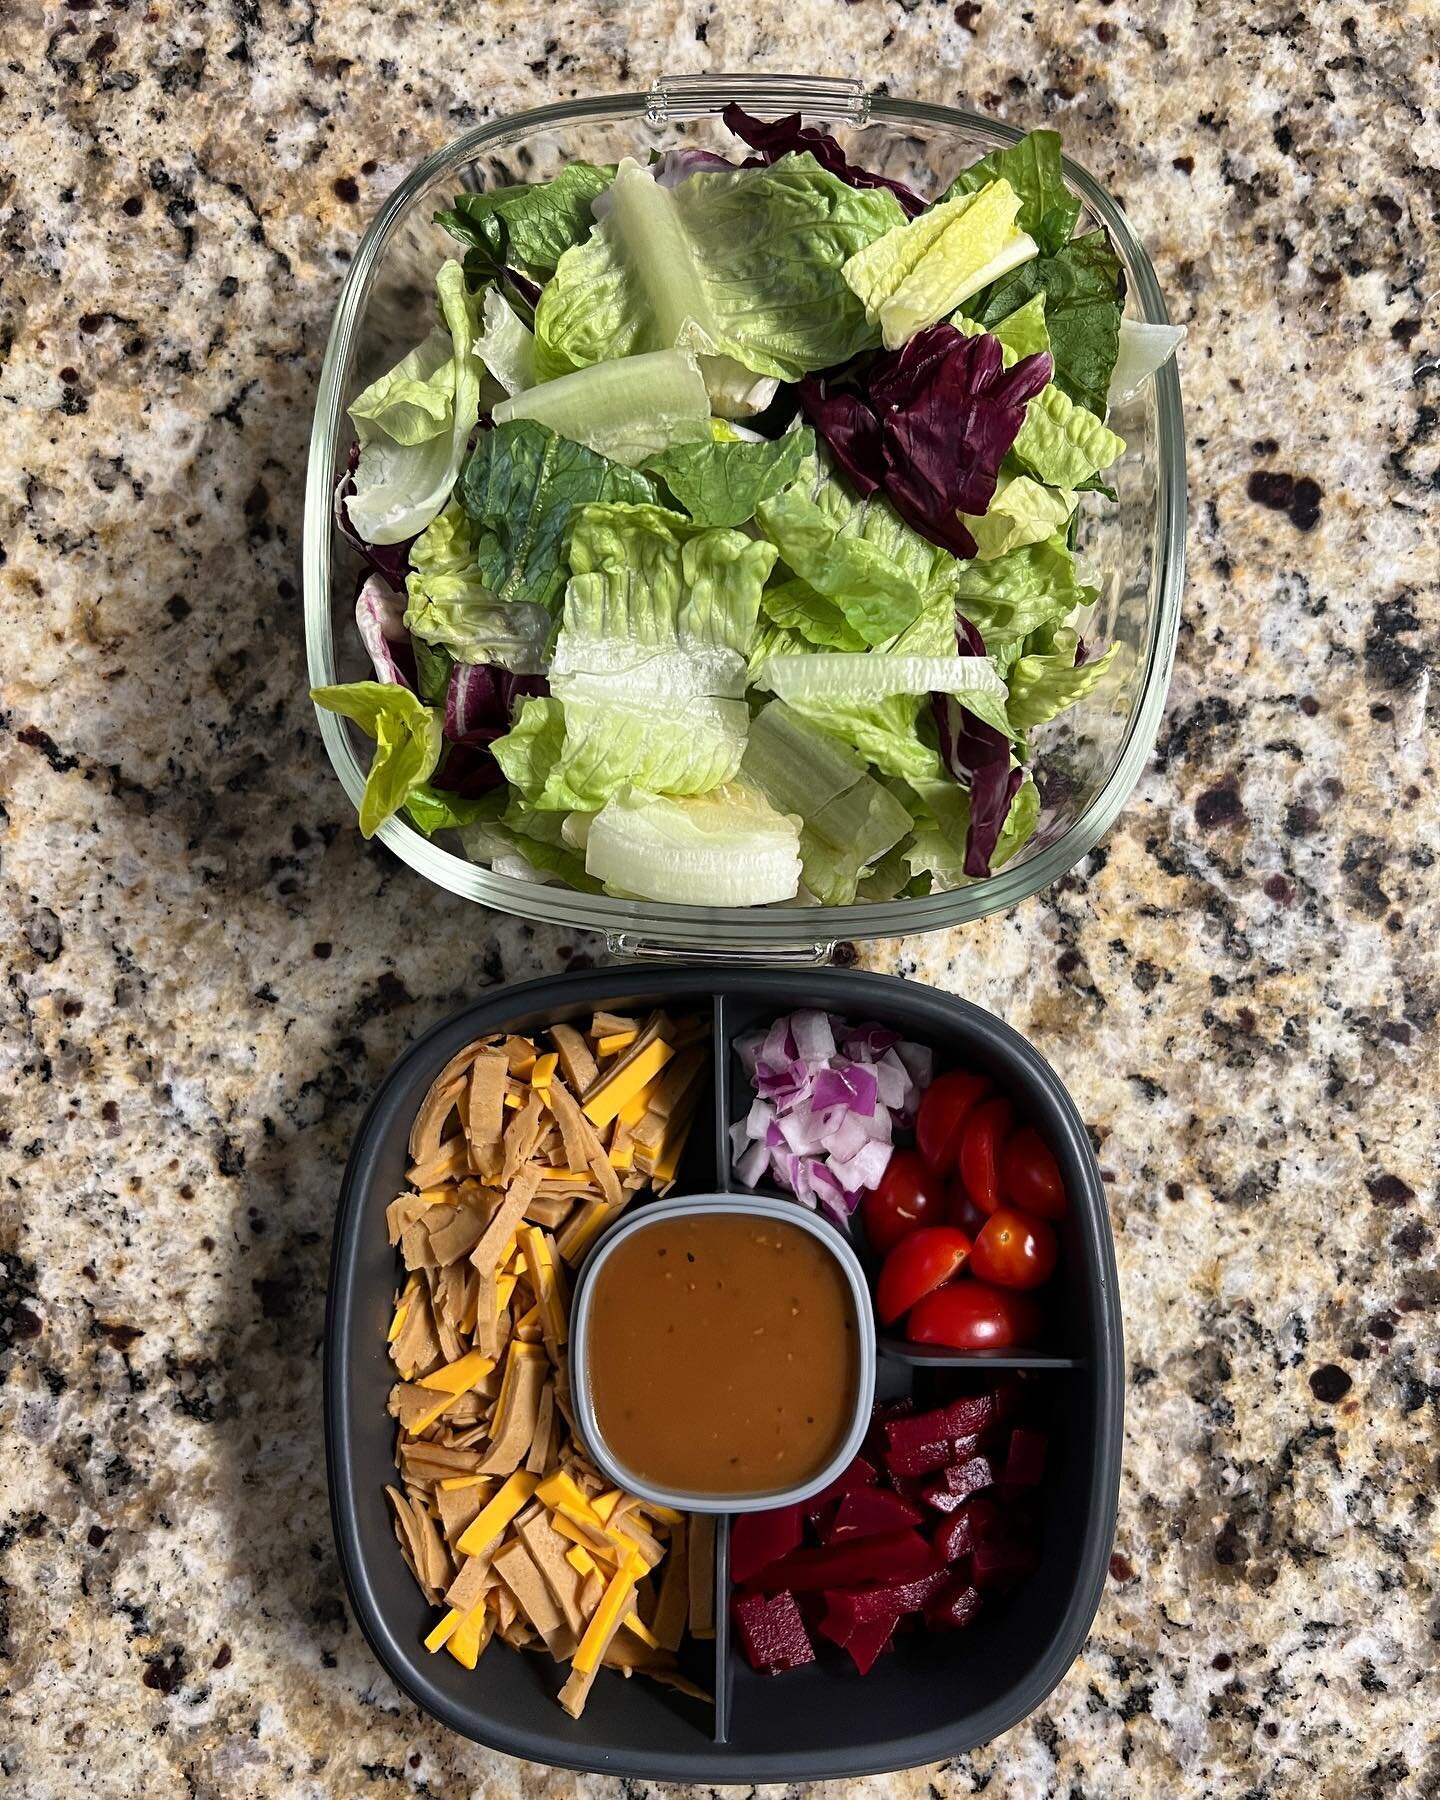 Daily salad

Hickory smoked slices, cheddar style slice, grape tomatoes, pickled beets, diced red onion and balsamic dressing over romaine and radicchio!